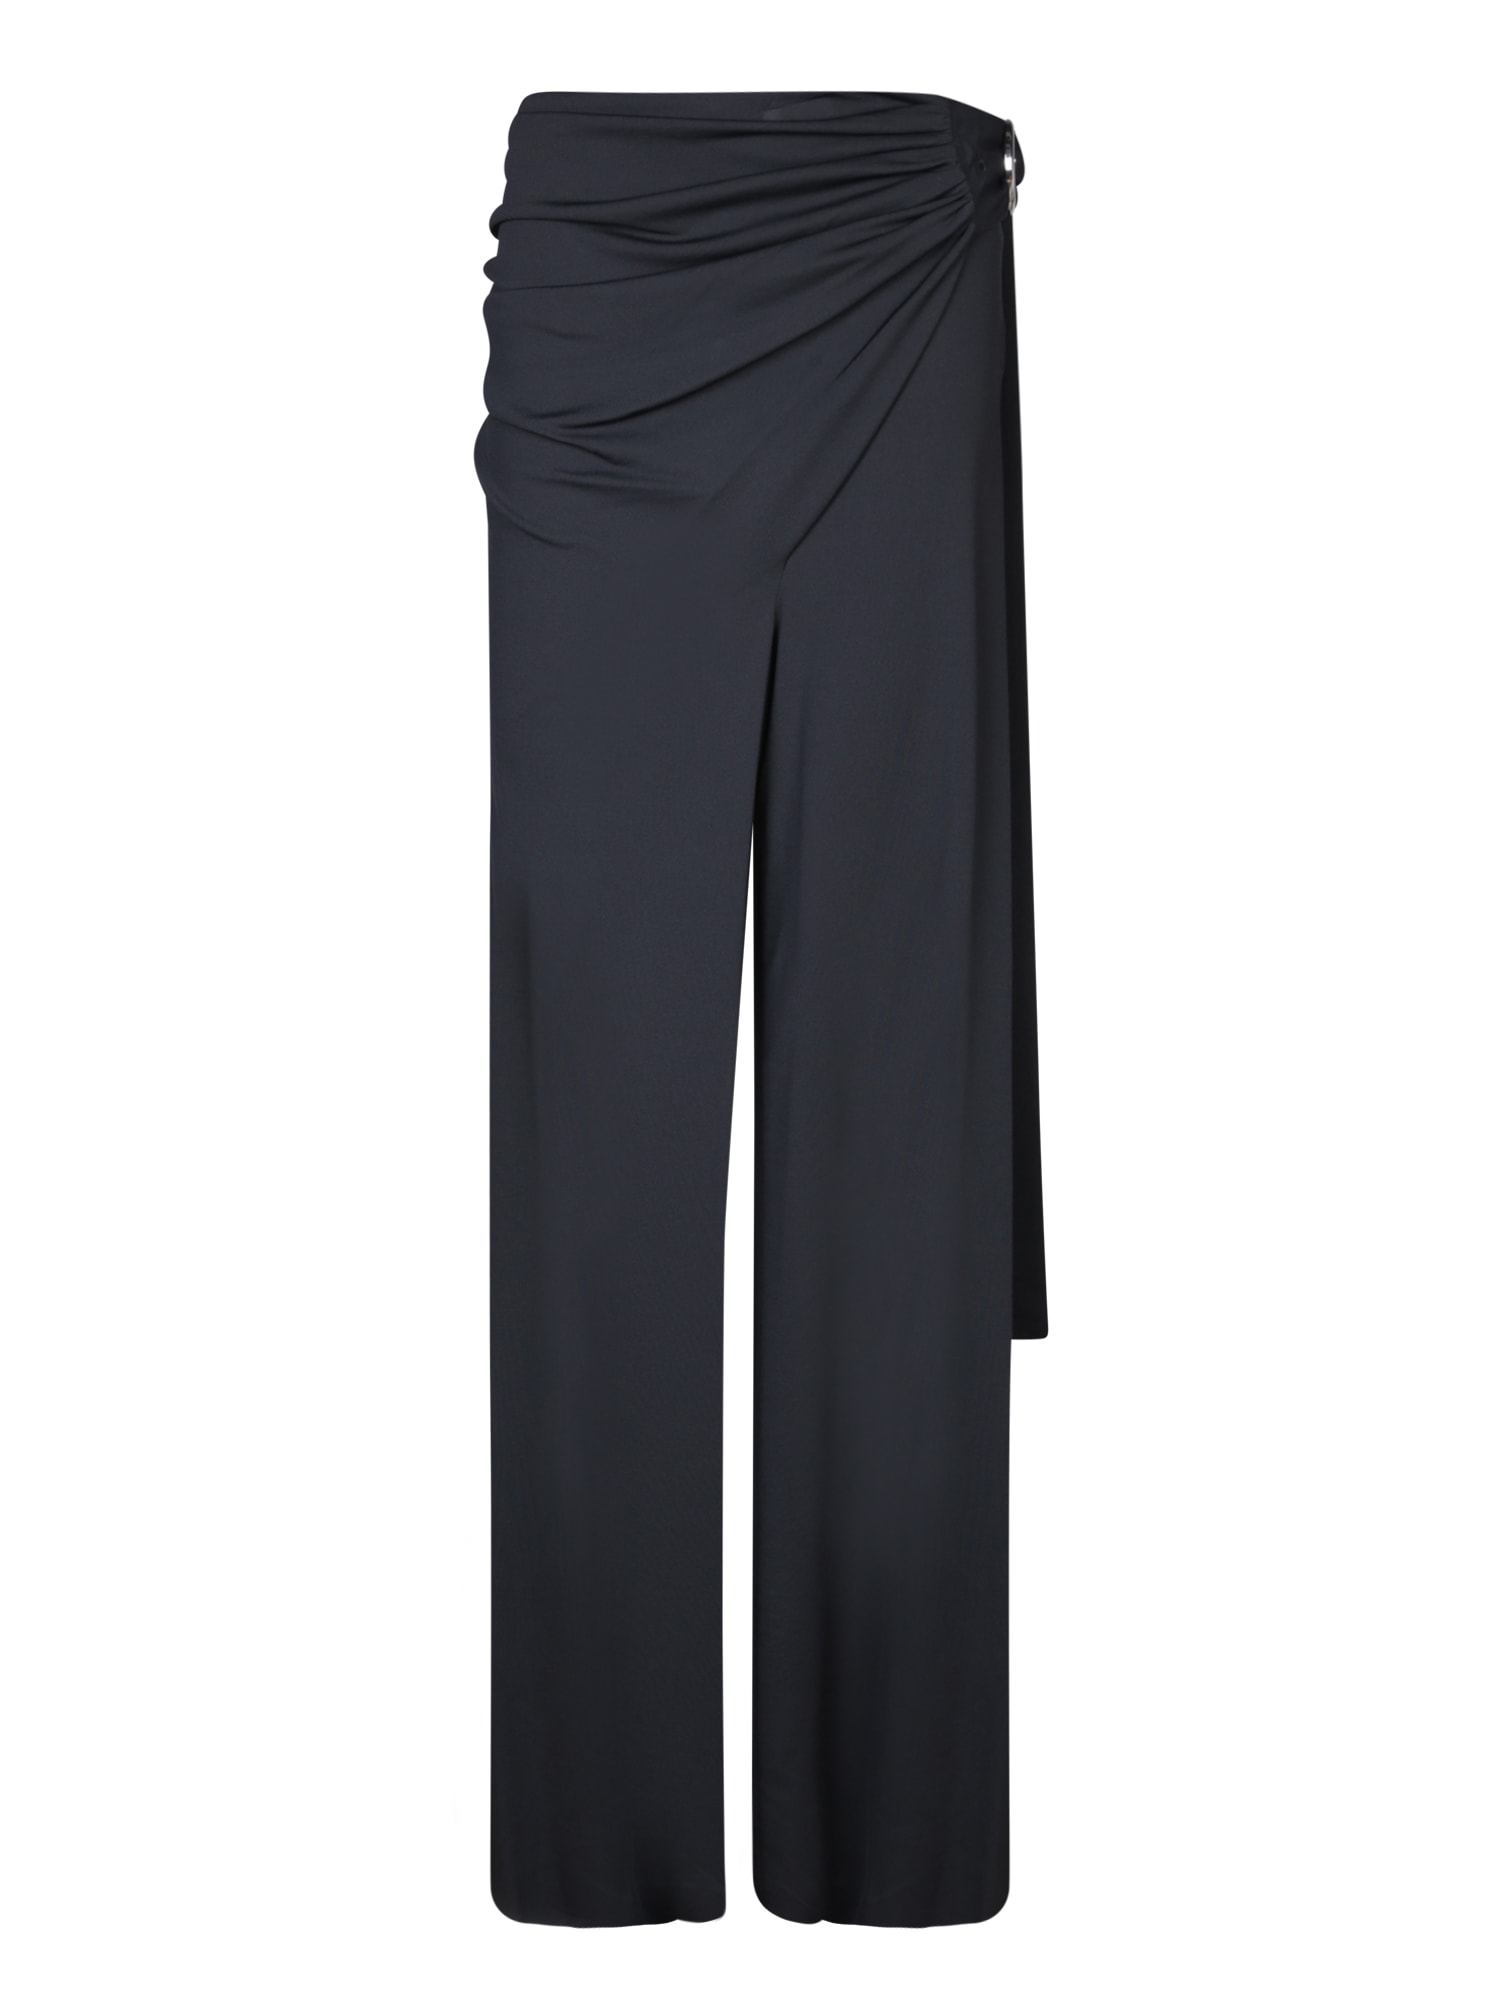 Shop Rabanne Black Jersey Knotted Trousers - Paco